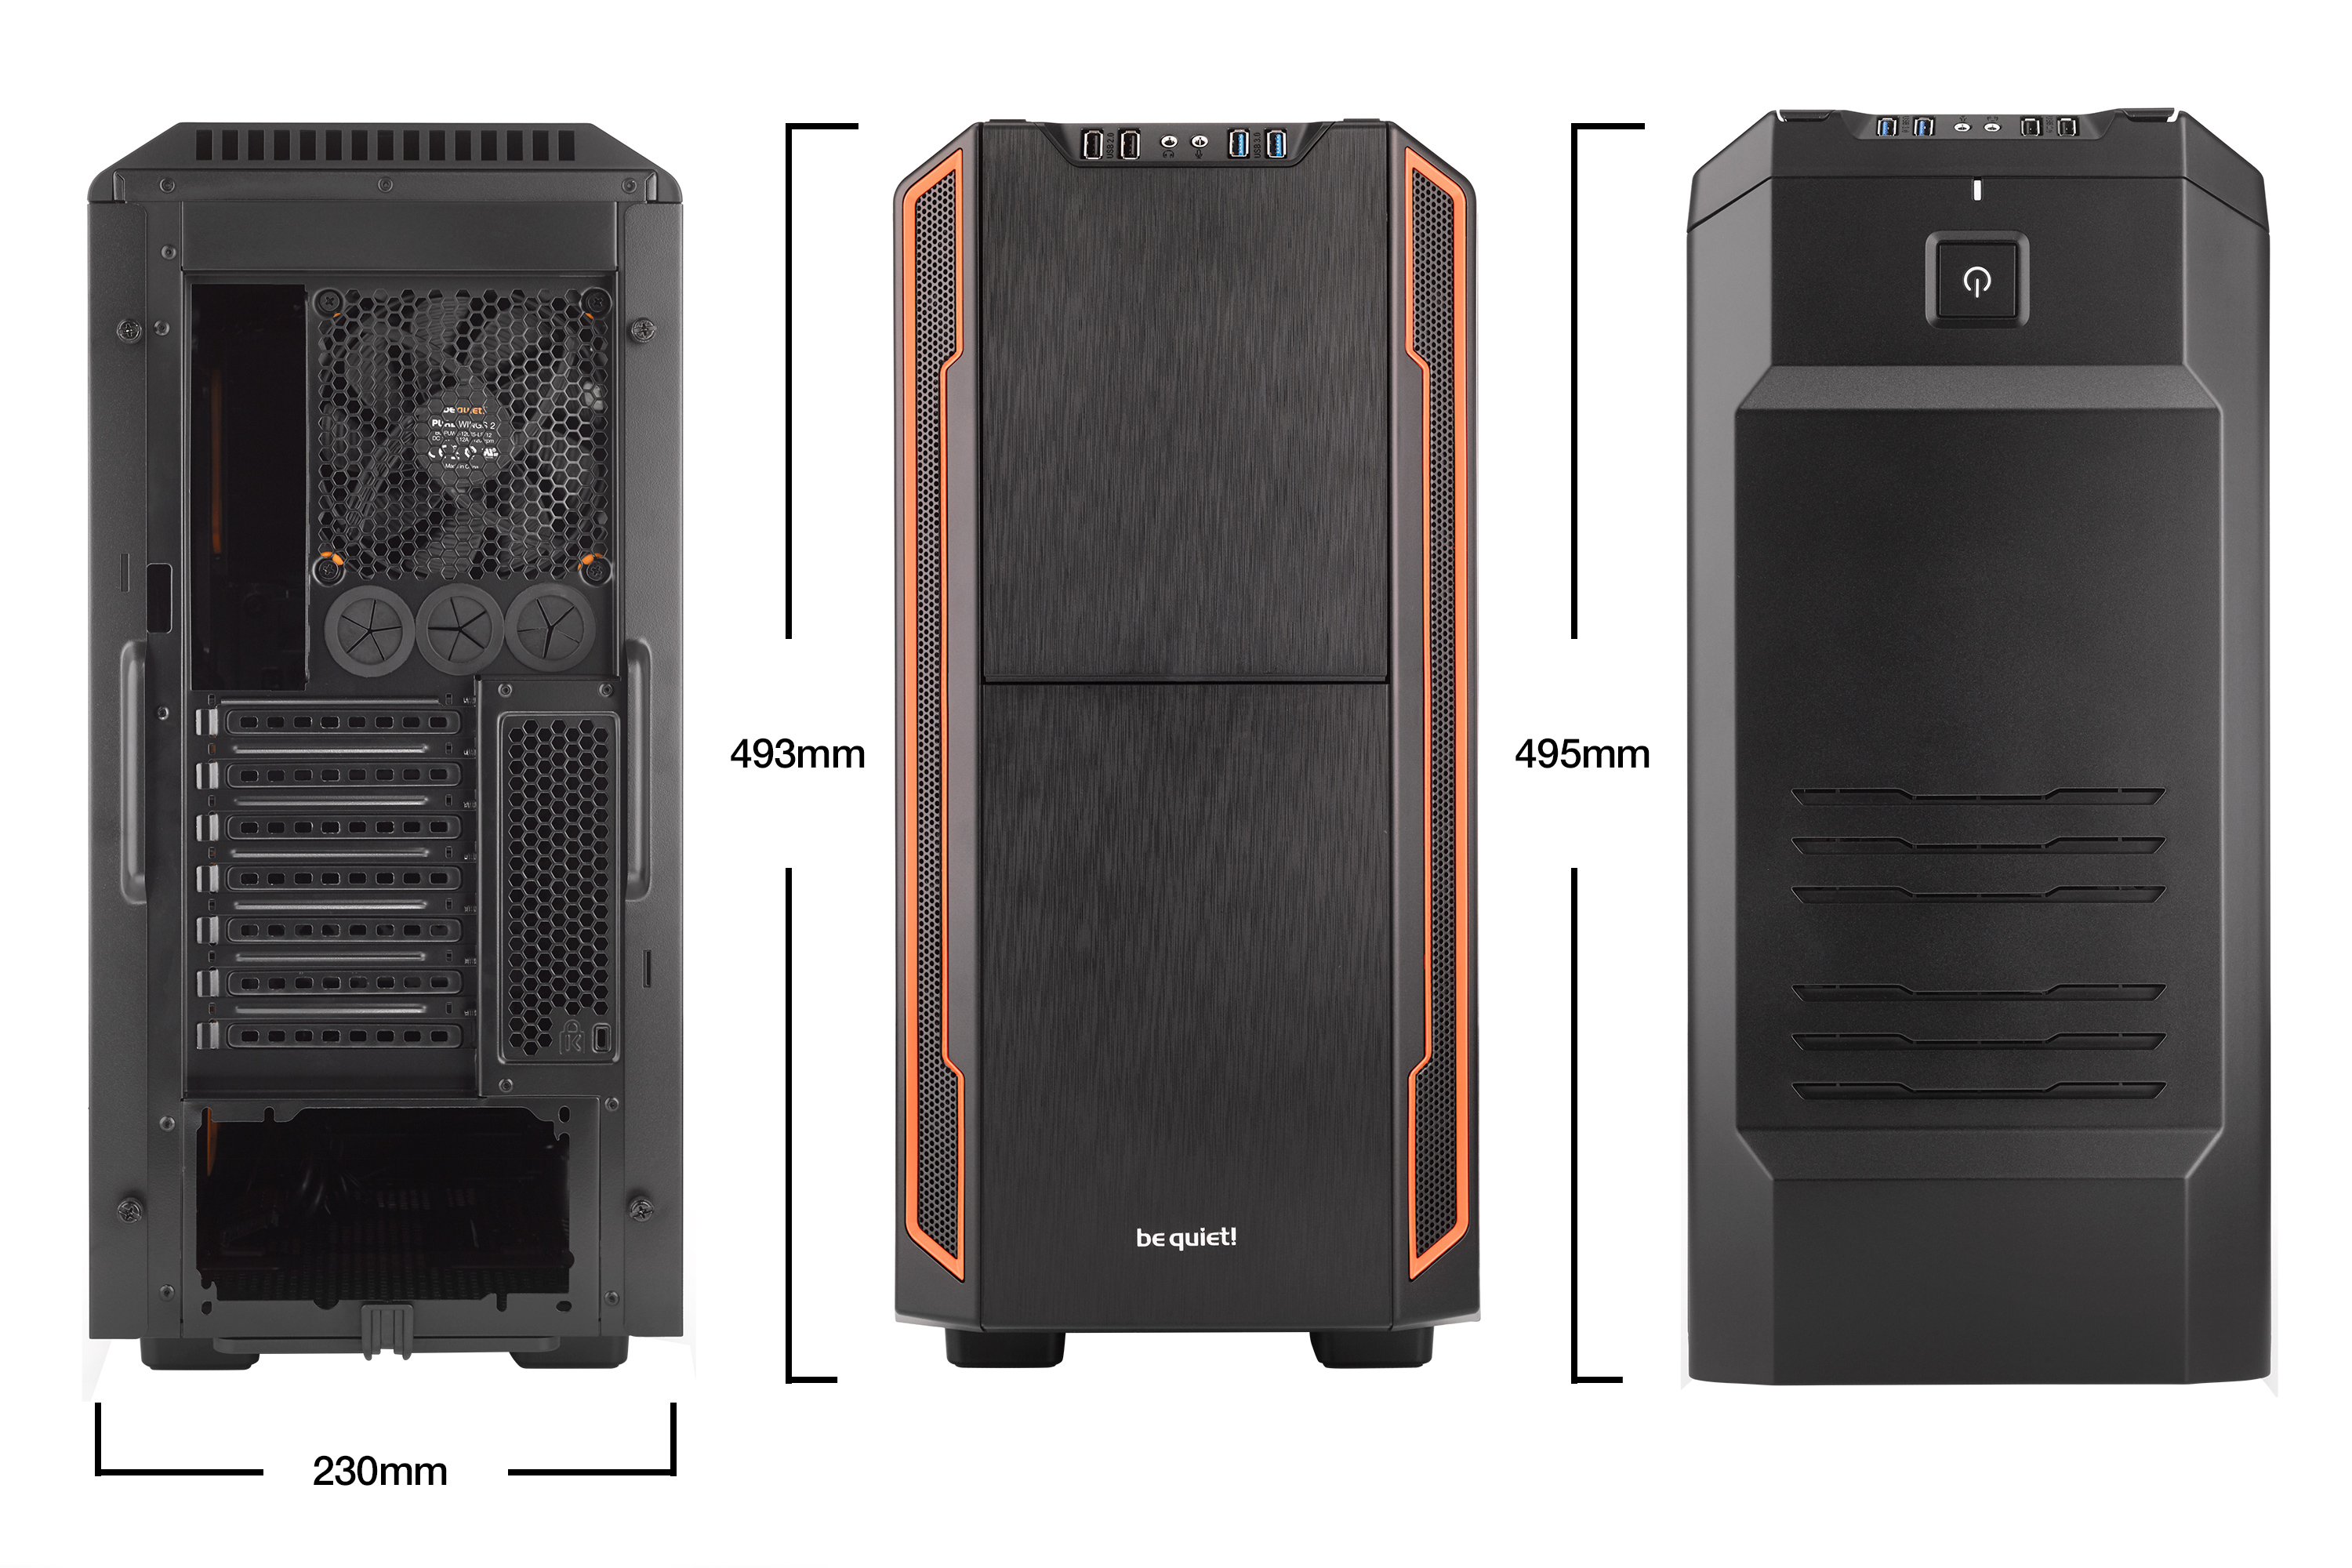 be quiet! Silent Base 600 Orange, 495 x 230 x 493, IO-panel 2x USB 3.0, 2x USB 2.0, HD Audio, 3x 5,25, 3x 3,5, 3x 2,5, inc 1x 140 mm en 1x 120 mm fan, dual air channel cooling, 3-in-1 airintake sidepanel